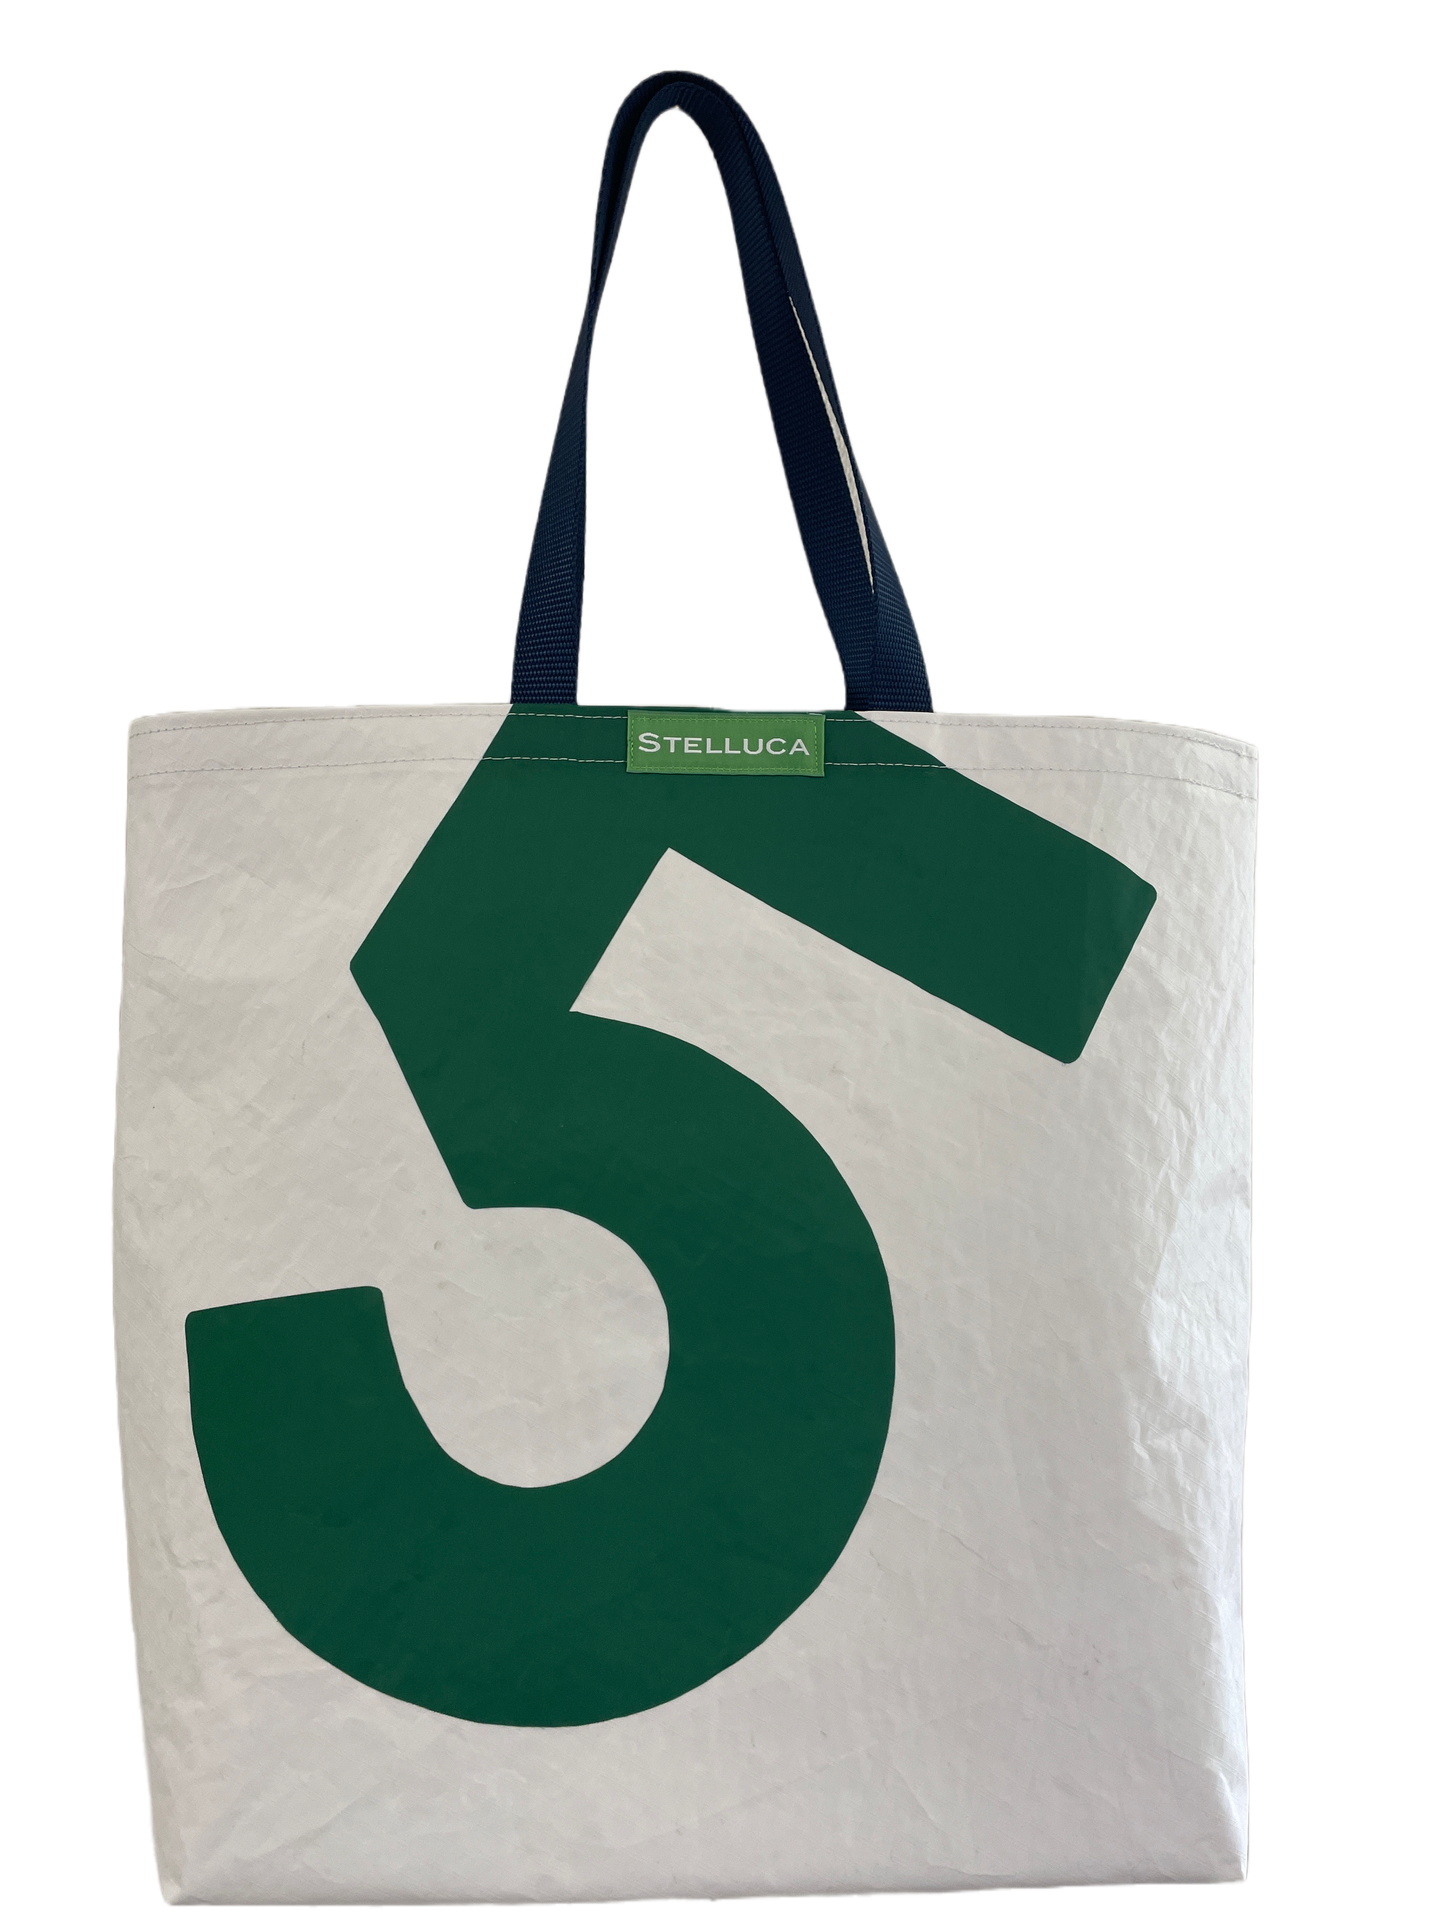 Green Grocery Tote #5